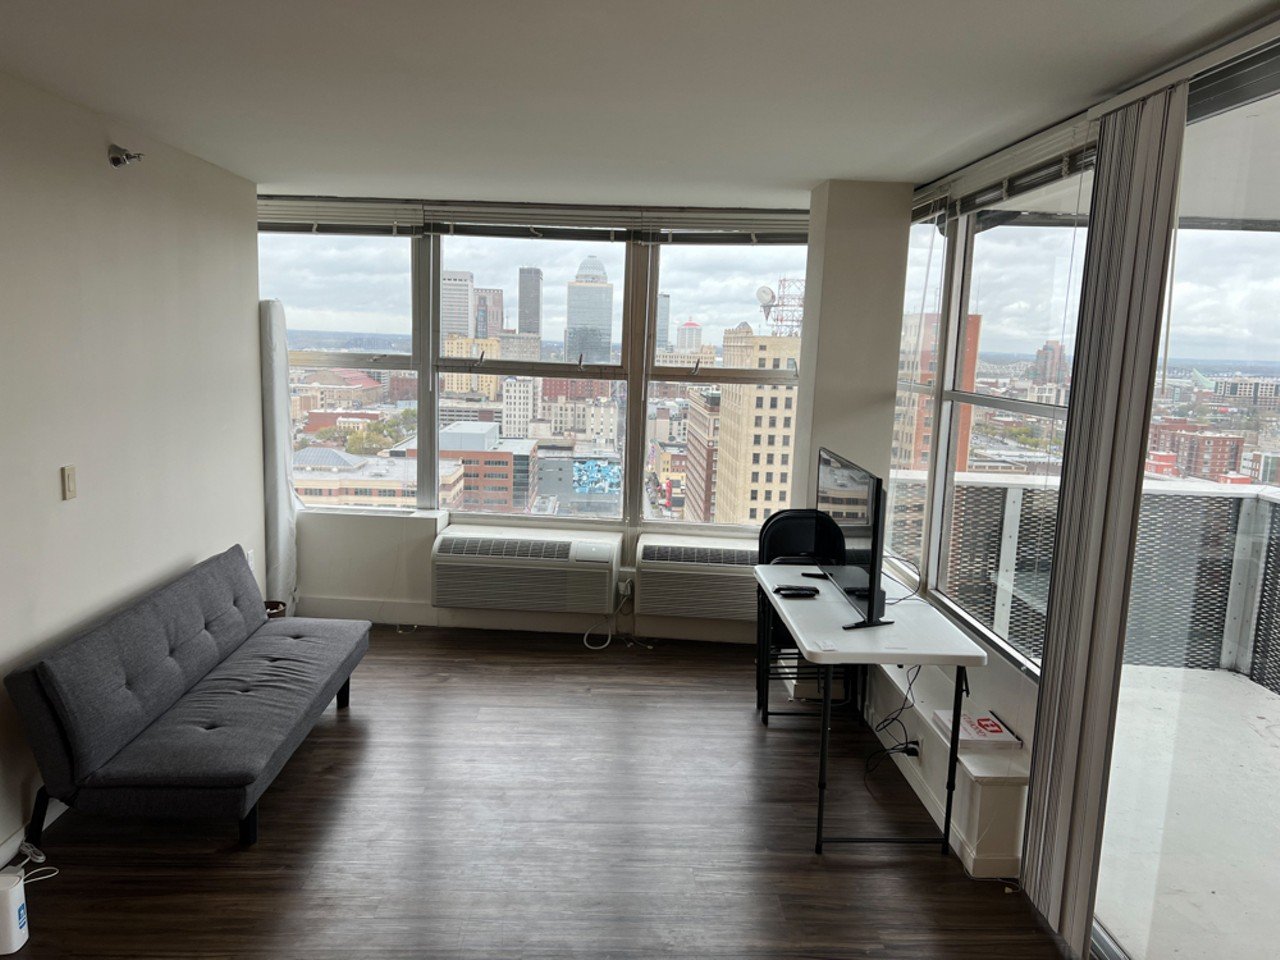 Lovely One-Bedroom Apt Near 4th Street Live!
Entire Rental Unit | Starting at $71/night | Hosts 2 Guests 
&#147;This Airbnb delivers hotel experiential living within minutes of Louisville's major attractions. Our Airbnb features resort-class amenities including 24/7 Whole Body Fitness, Sky Club with Rooftop Pool, Indoor Theater, and on-site restaurant, CC's Kitchen.&#148;